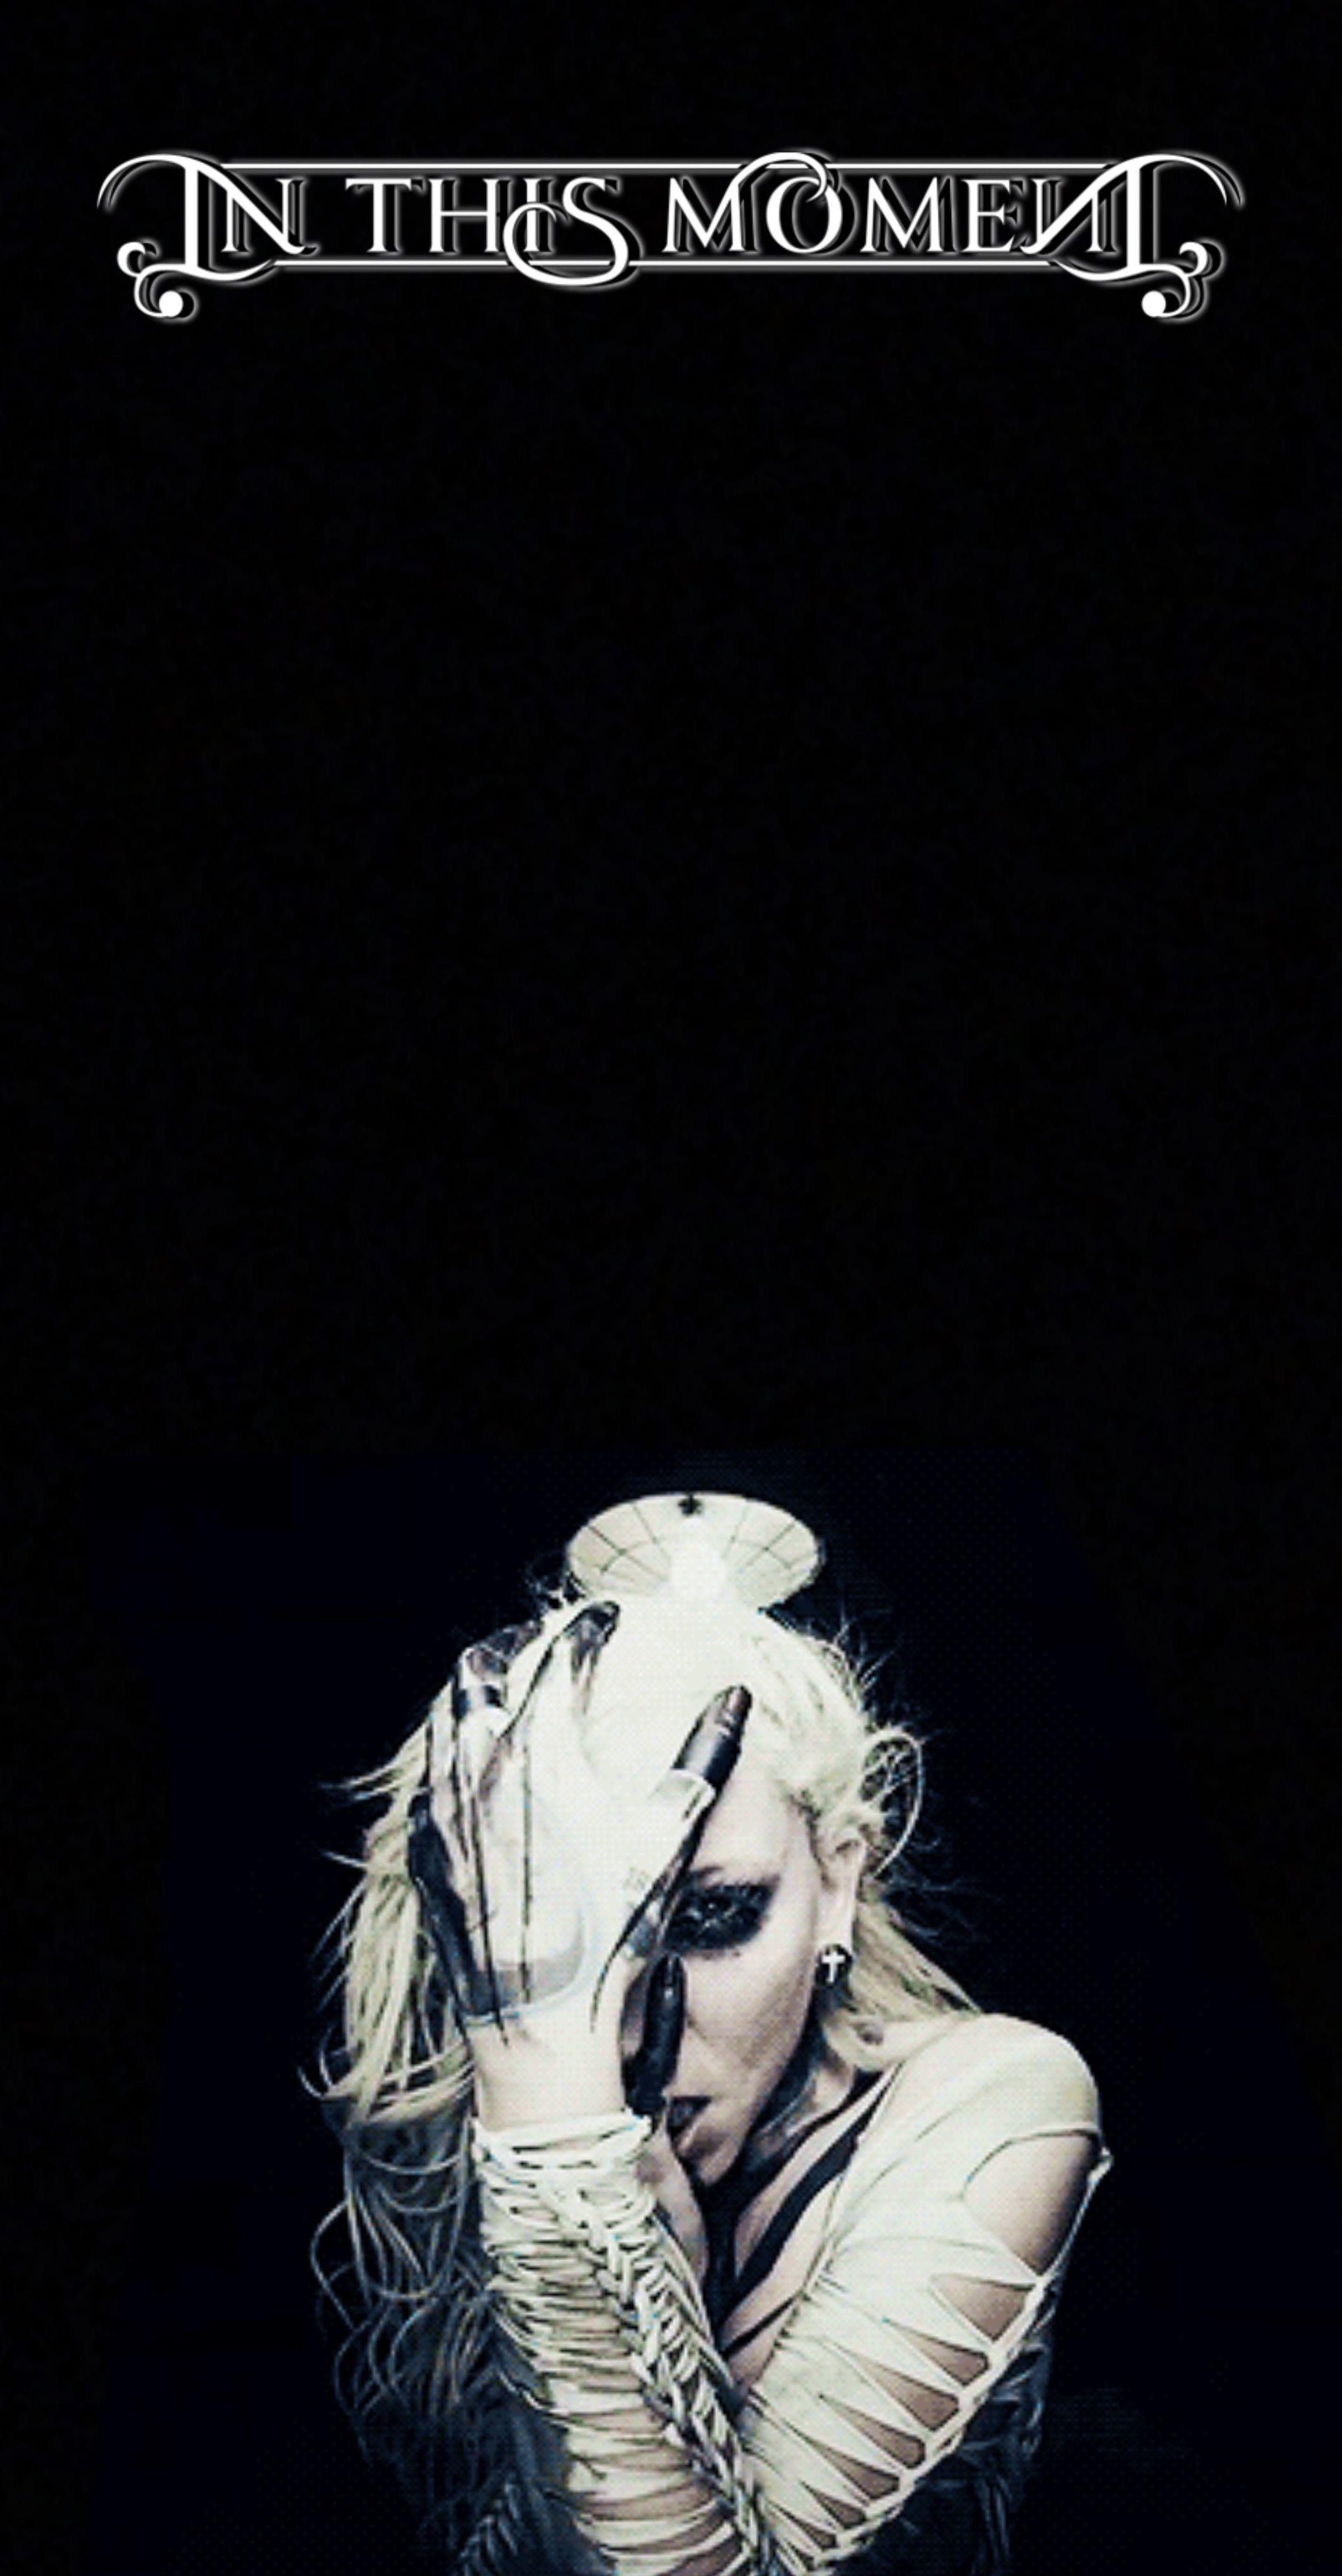 Wallpaper on instagram. Maria brink, In this moment, Music is life